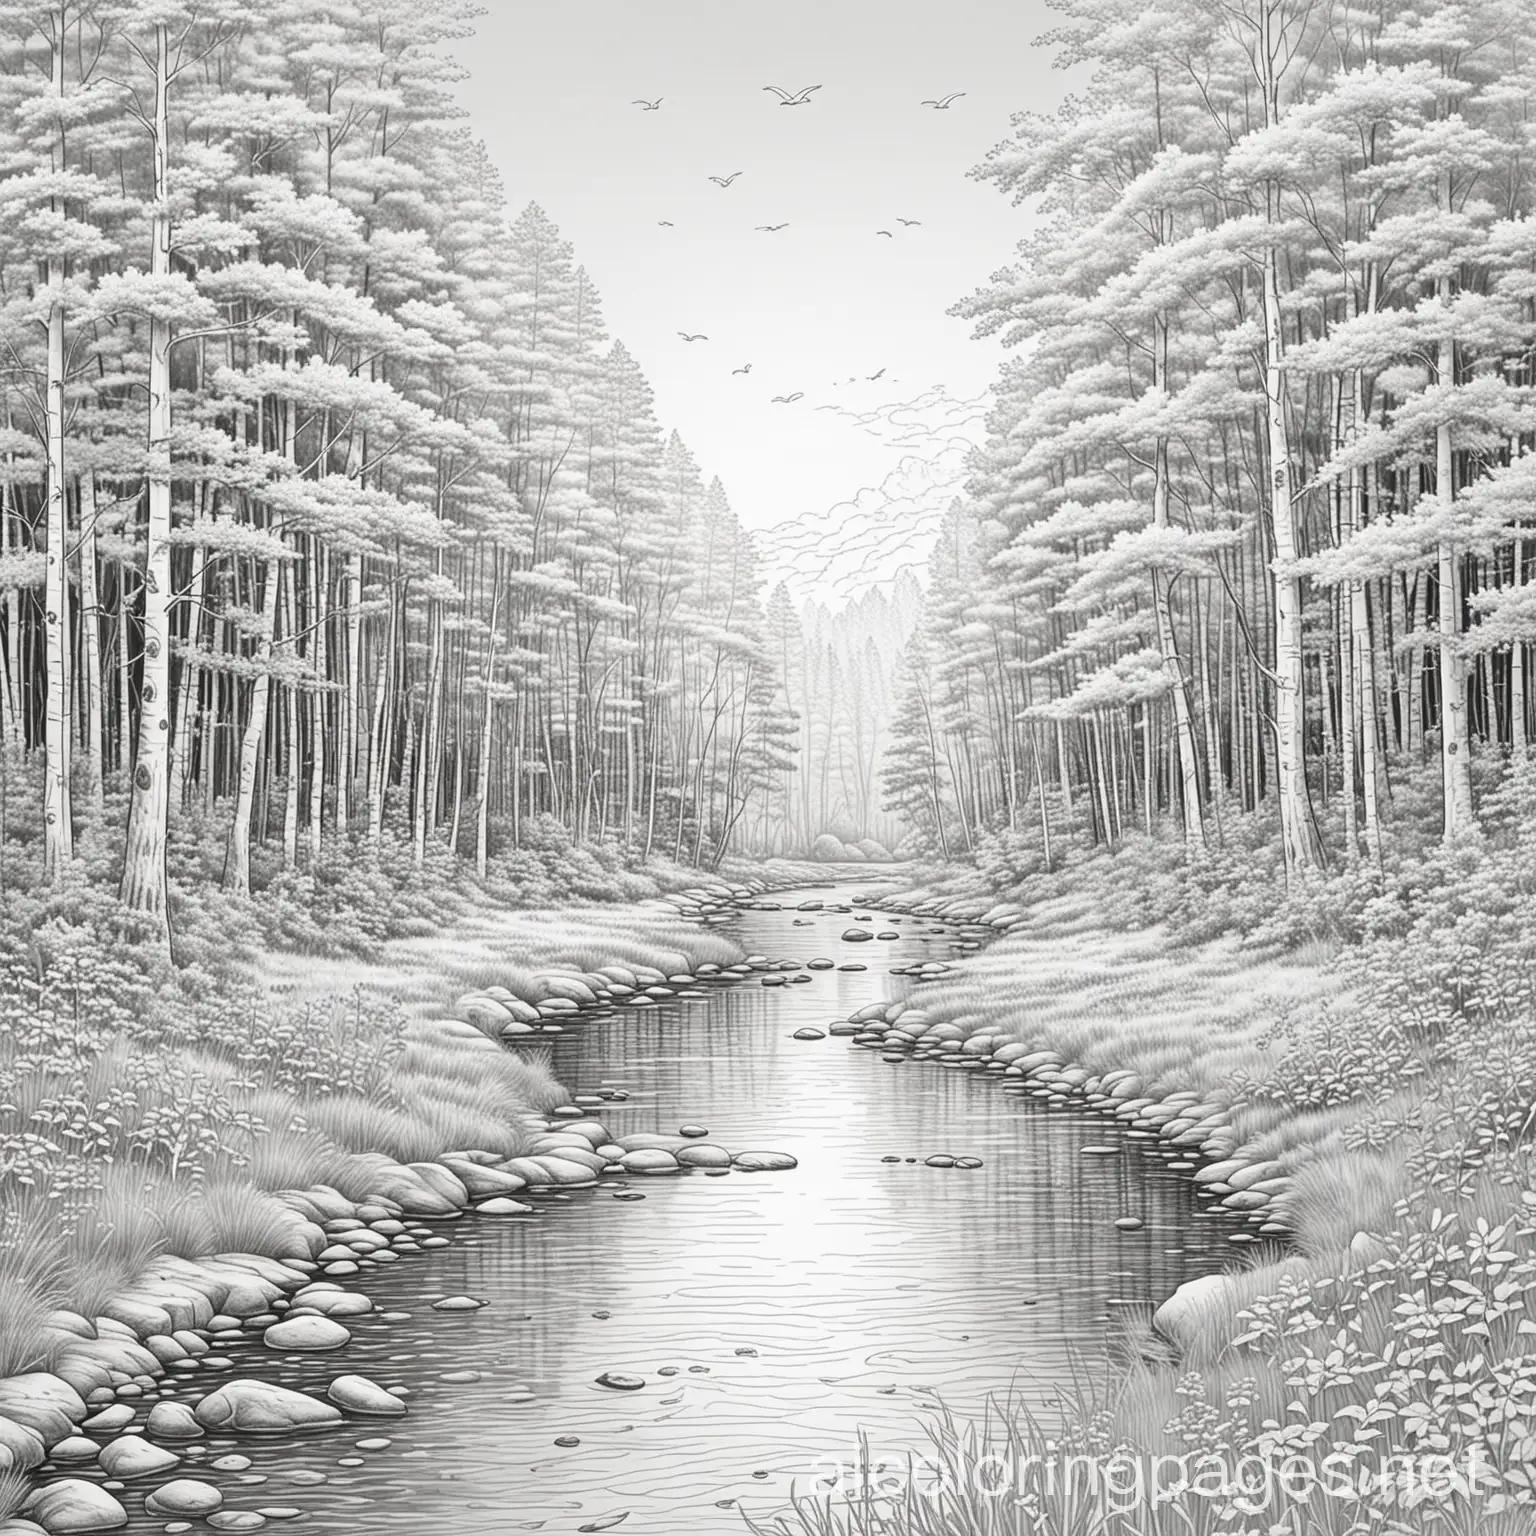 A serene landscape, perhaps a sunrise over a quiet river or a peaceful forest clearing, with soft instrumental music playing in the background., Coloring Page, black and white, line art, white background, Simplicity, Ample White Space. The background of the coloring page is plain white to make it easy for young children to color within the lines. The outlines of all the subjects are easy to distinguish, making it simple for kids to color without too much difficulty